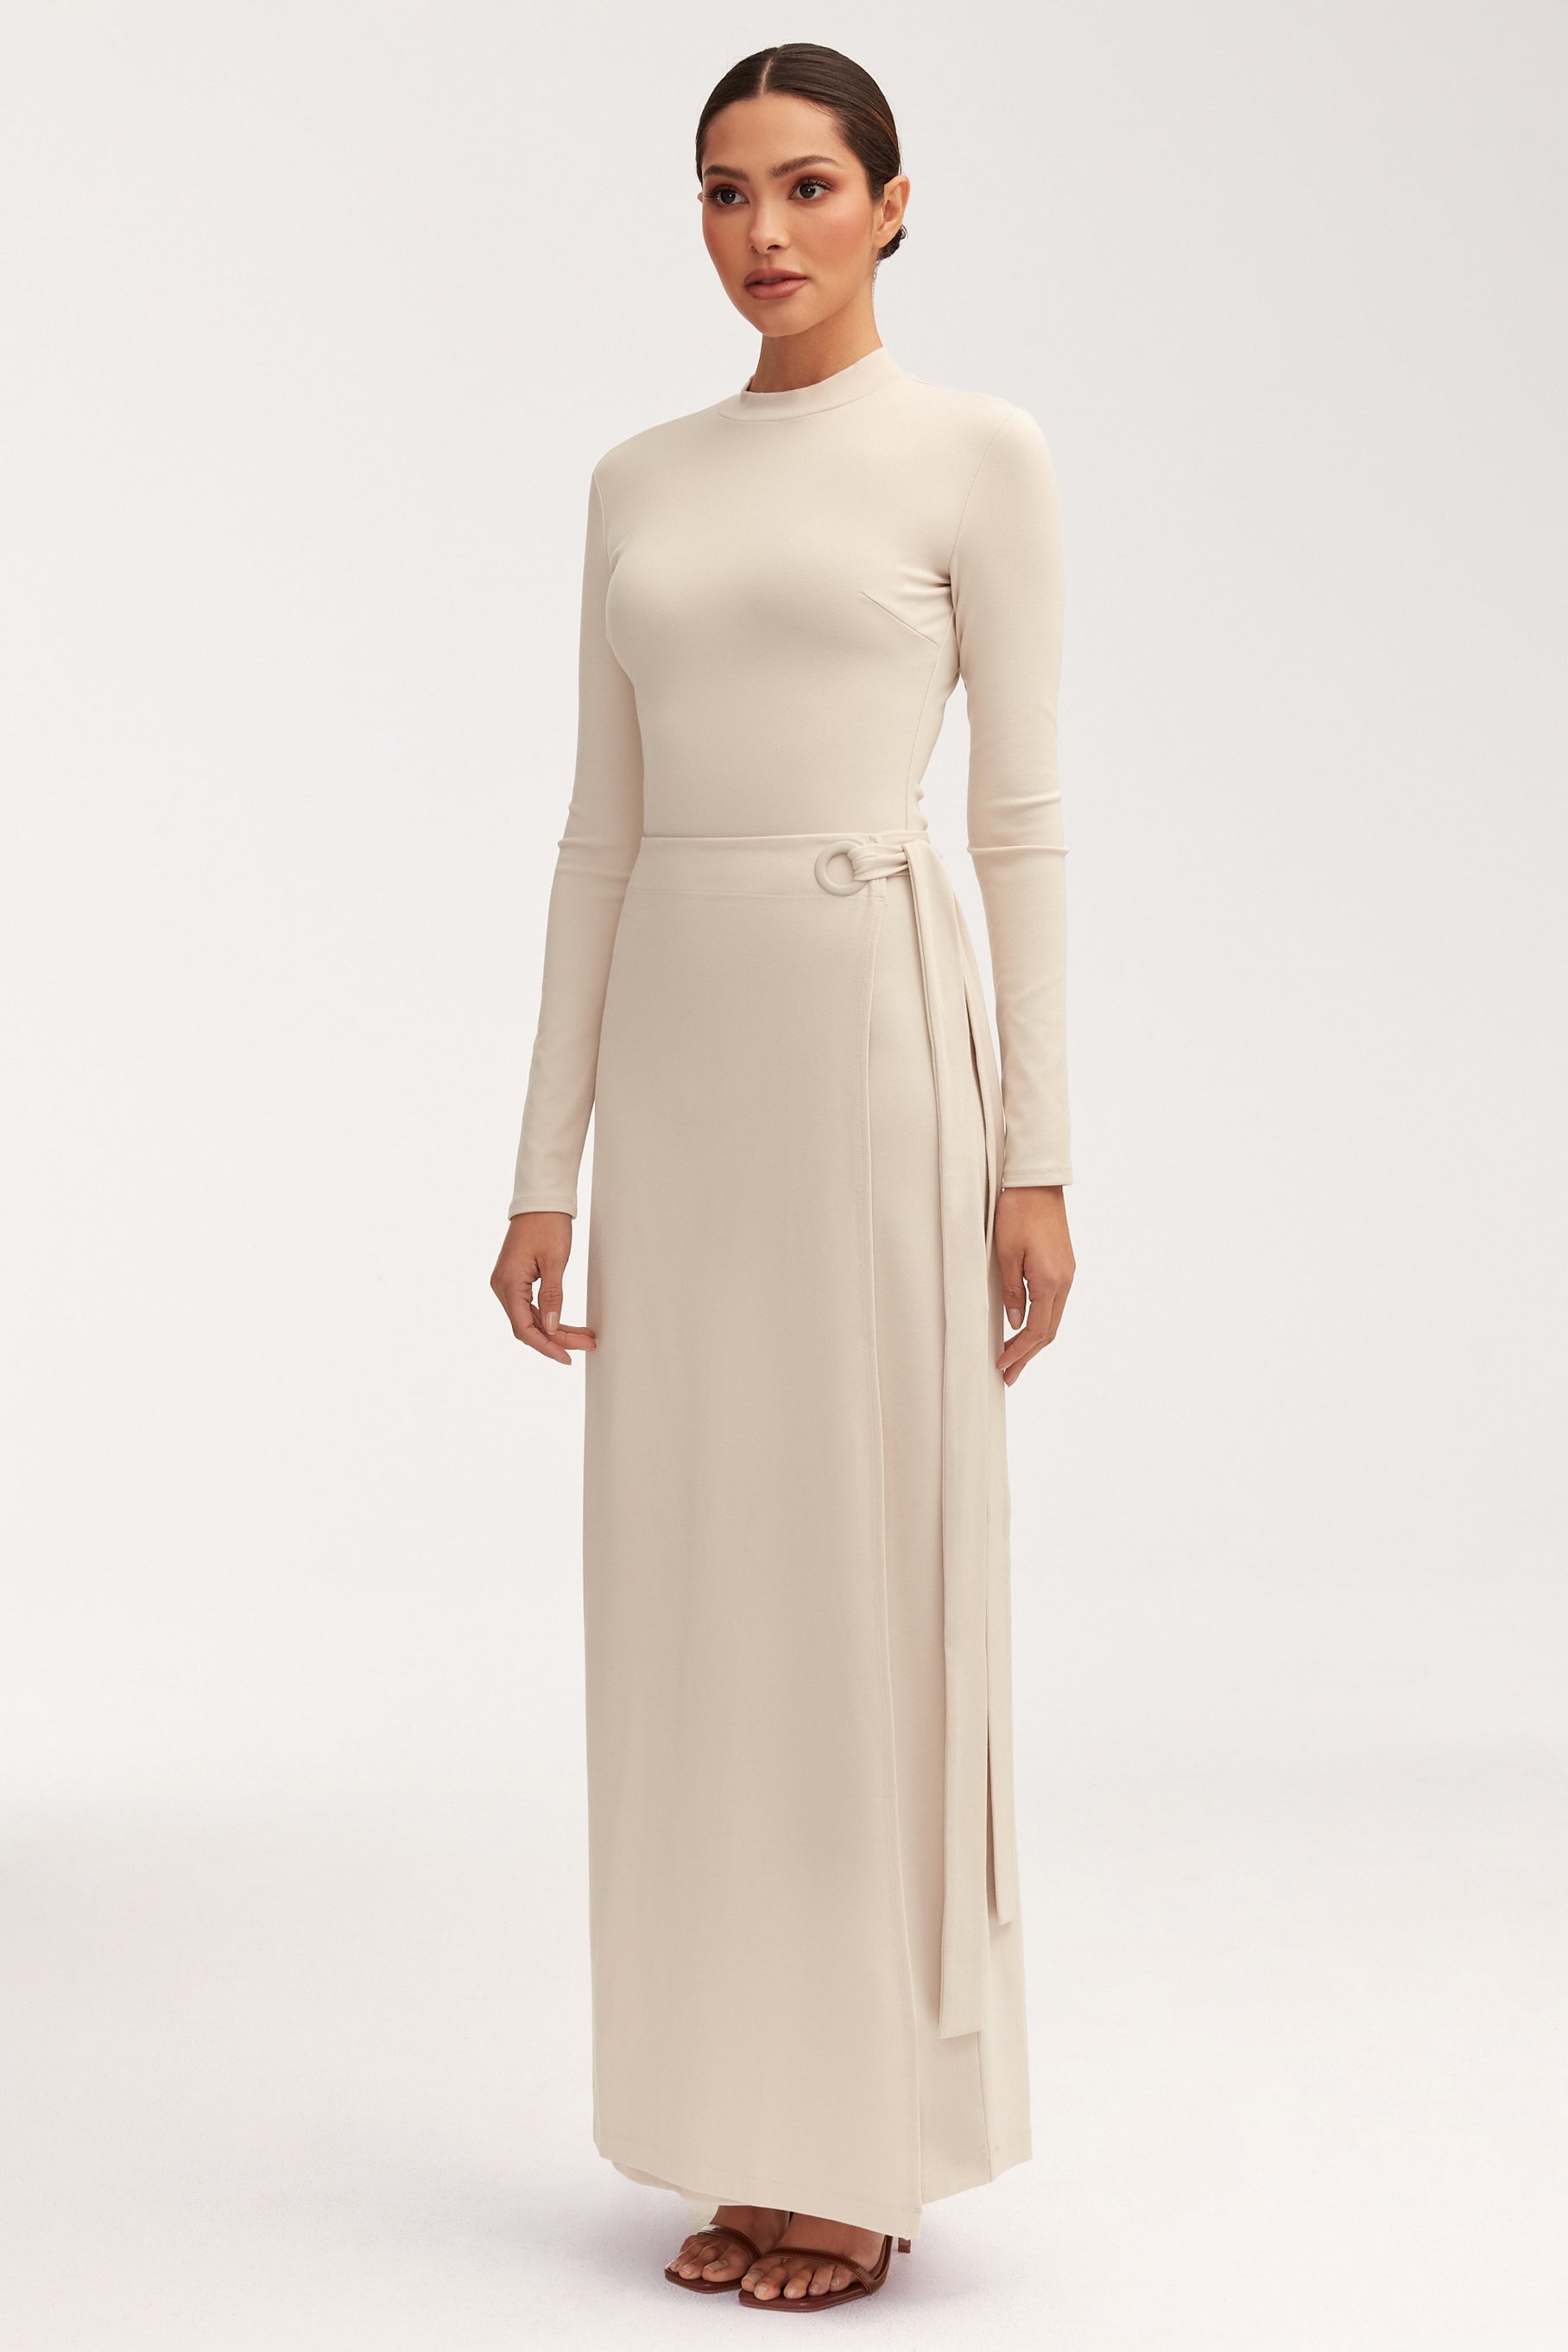 Melissa Jersey Maxi Dress with Wrap Skirt - Stone Sets Veiled 